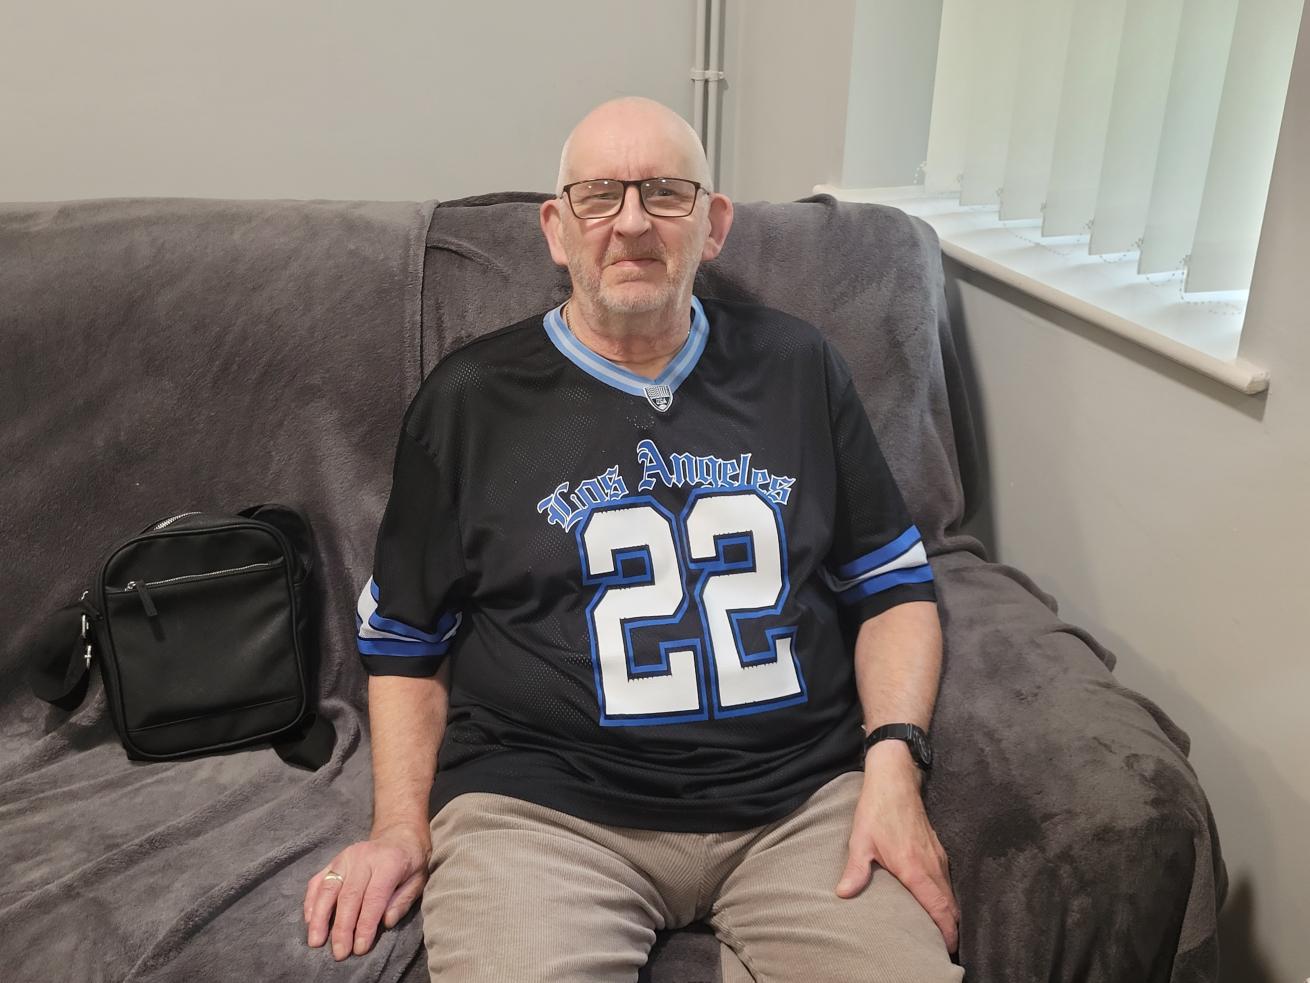  An older white man wearing glasses and a dark Los Angeles sports shirt, sitting on a cream sofa and smiling at the camera.